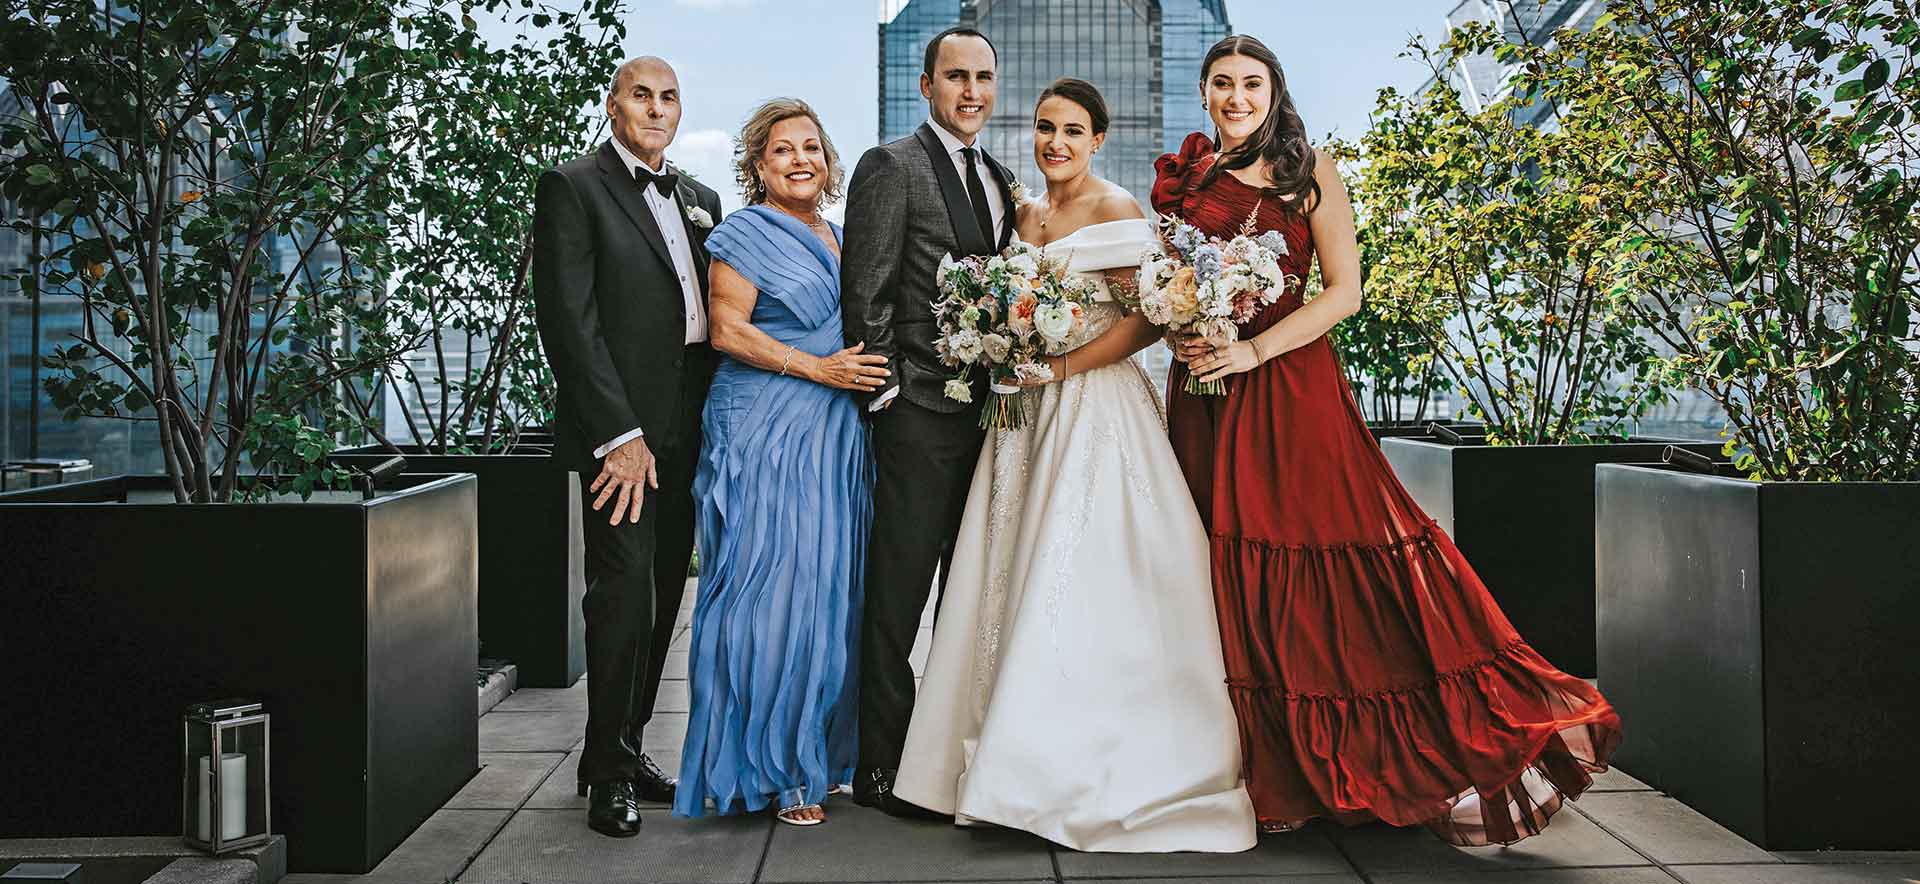 Rachel Weissman stands with her family at her wedding.